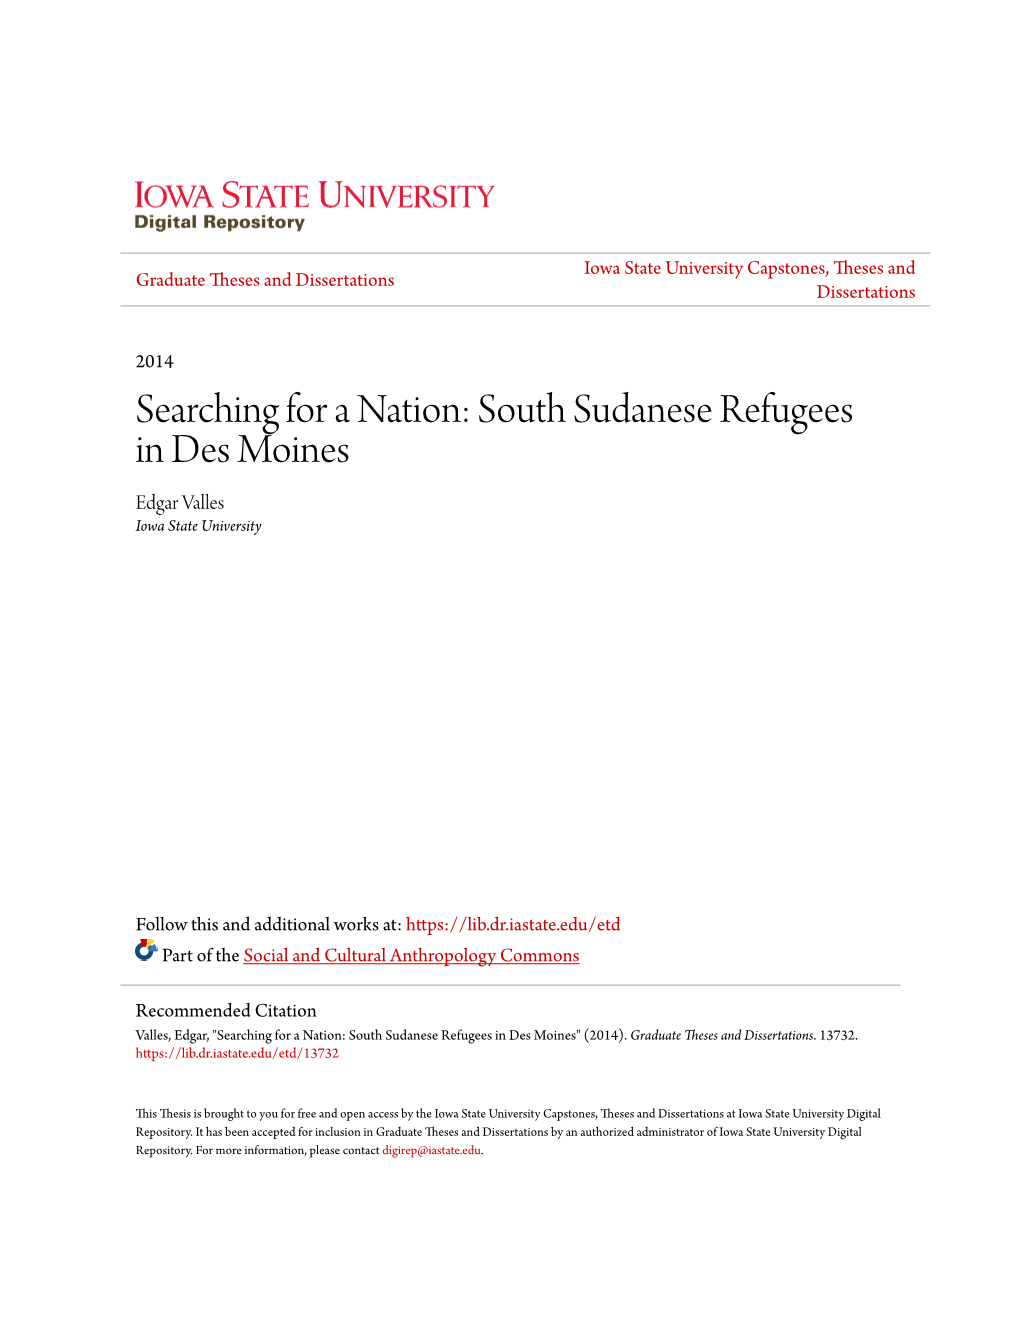 South Sudanese Refugees in Des Moines Edgar Valles Iowa State University